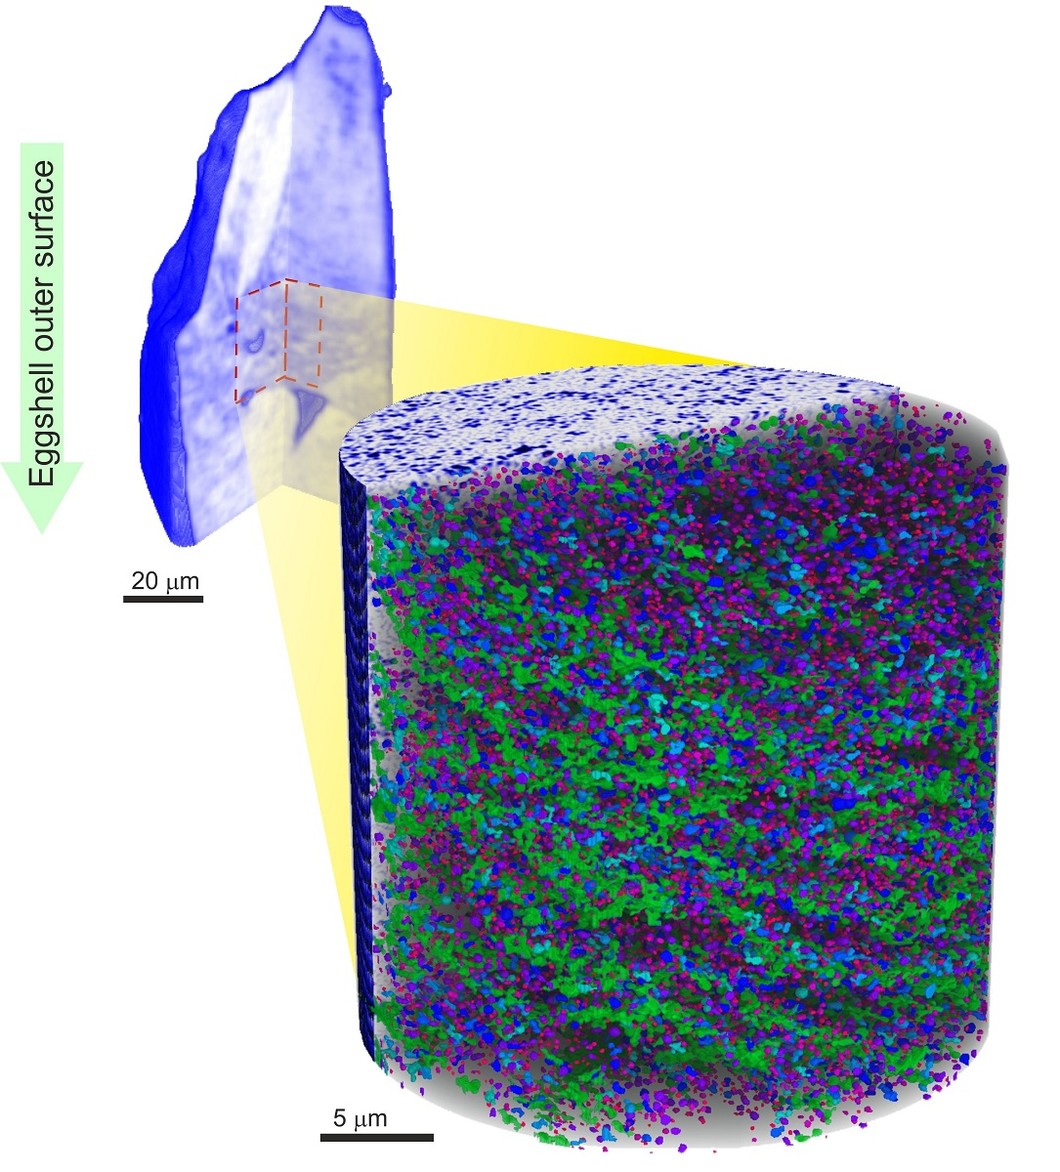 A small section of avian eggshell is studied. To the left an overview tomogram allows to identify the region of interest with the porous structure. Nanoscale vesicles cannot be individually seen. The right part of the figure shows the zoom-in interior reconstruction obtained with ptychographic X-ray tomography, where individual vesicles can be seen and their arrangement and structure can be analyzed. At the right the digitally extracted pores are shown color coded by size, where 100 nm pores are red and th…